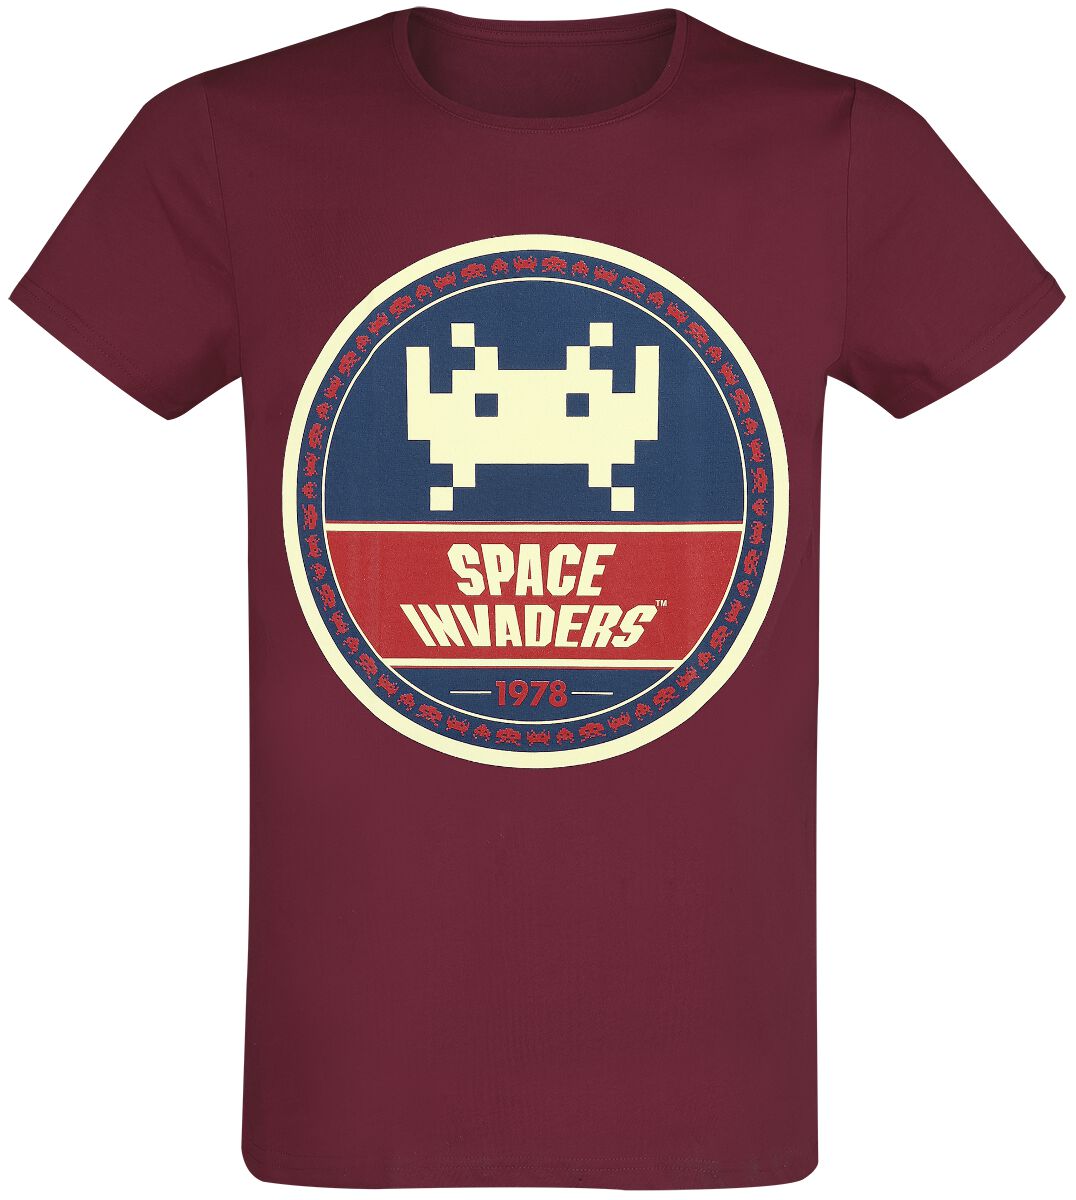 Space Invaders Space Invaders - Round Invader T-Shirt red blue